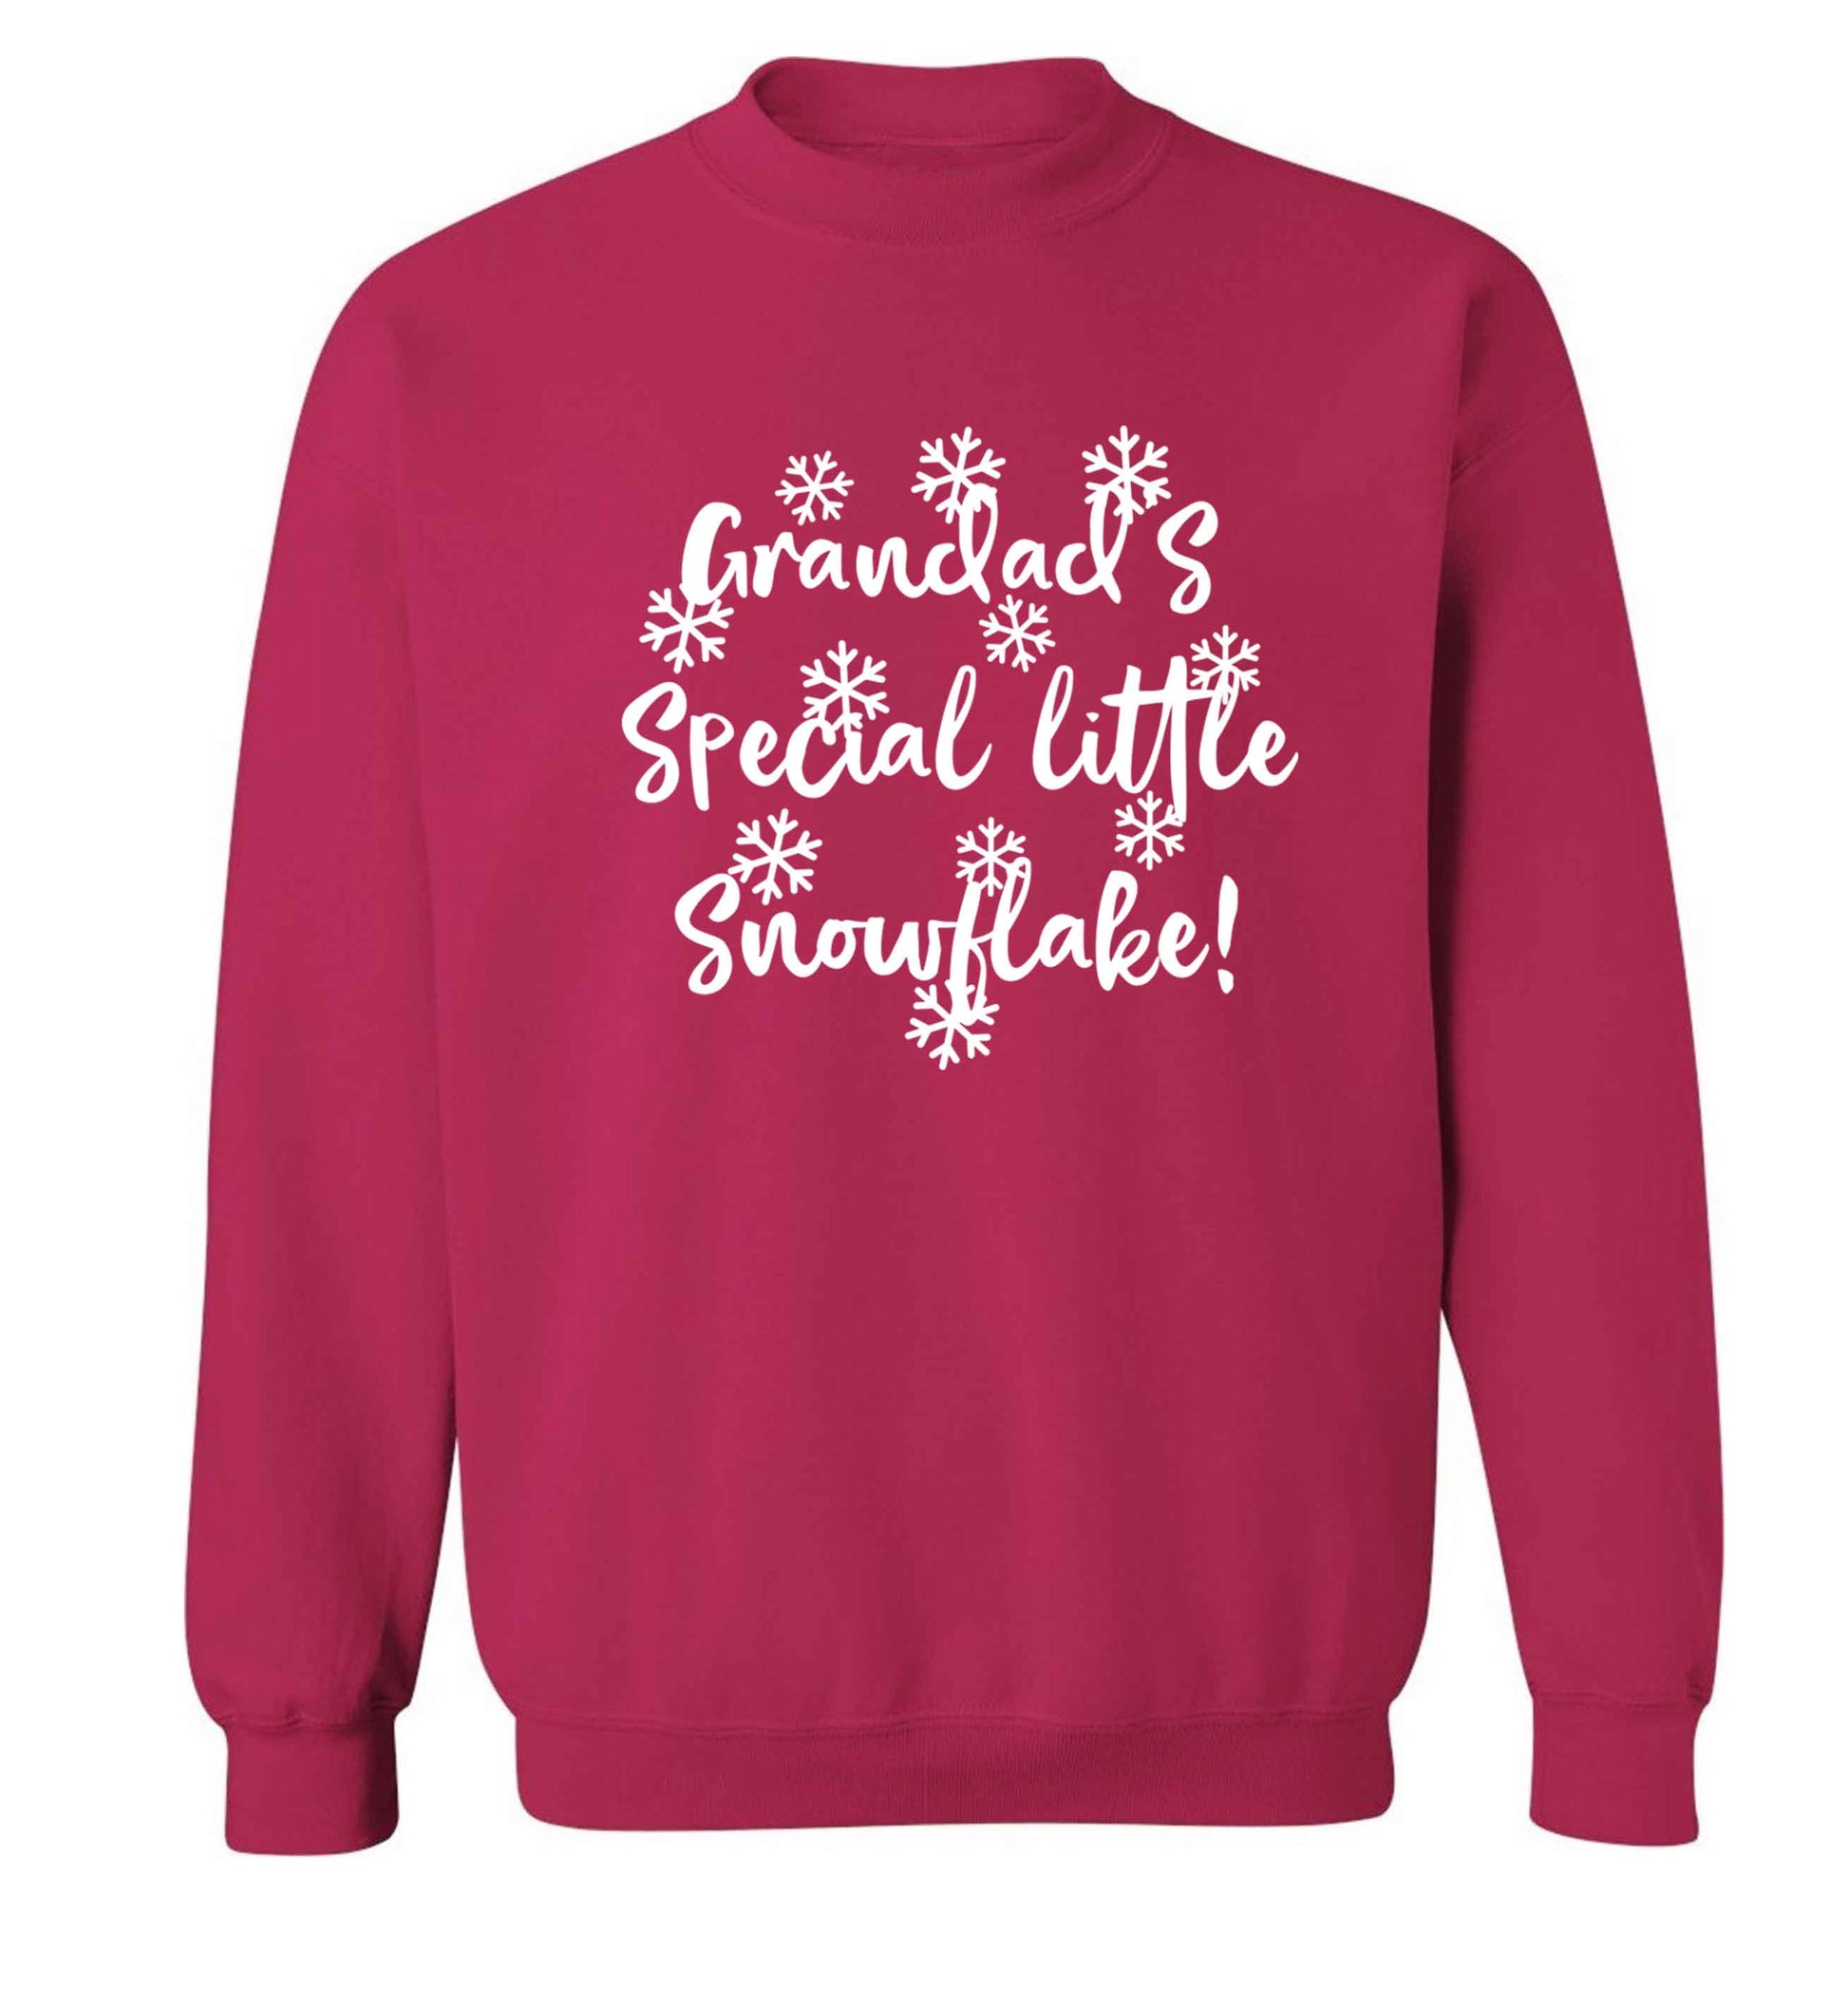 Grandad's special little snowflake Adult's unisex pink Sweater 2XL